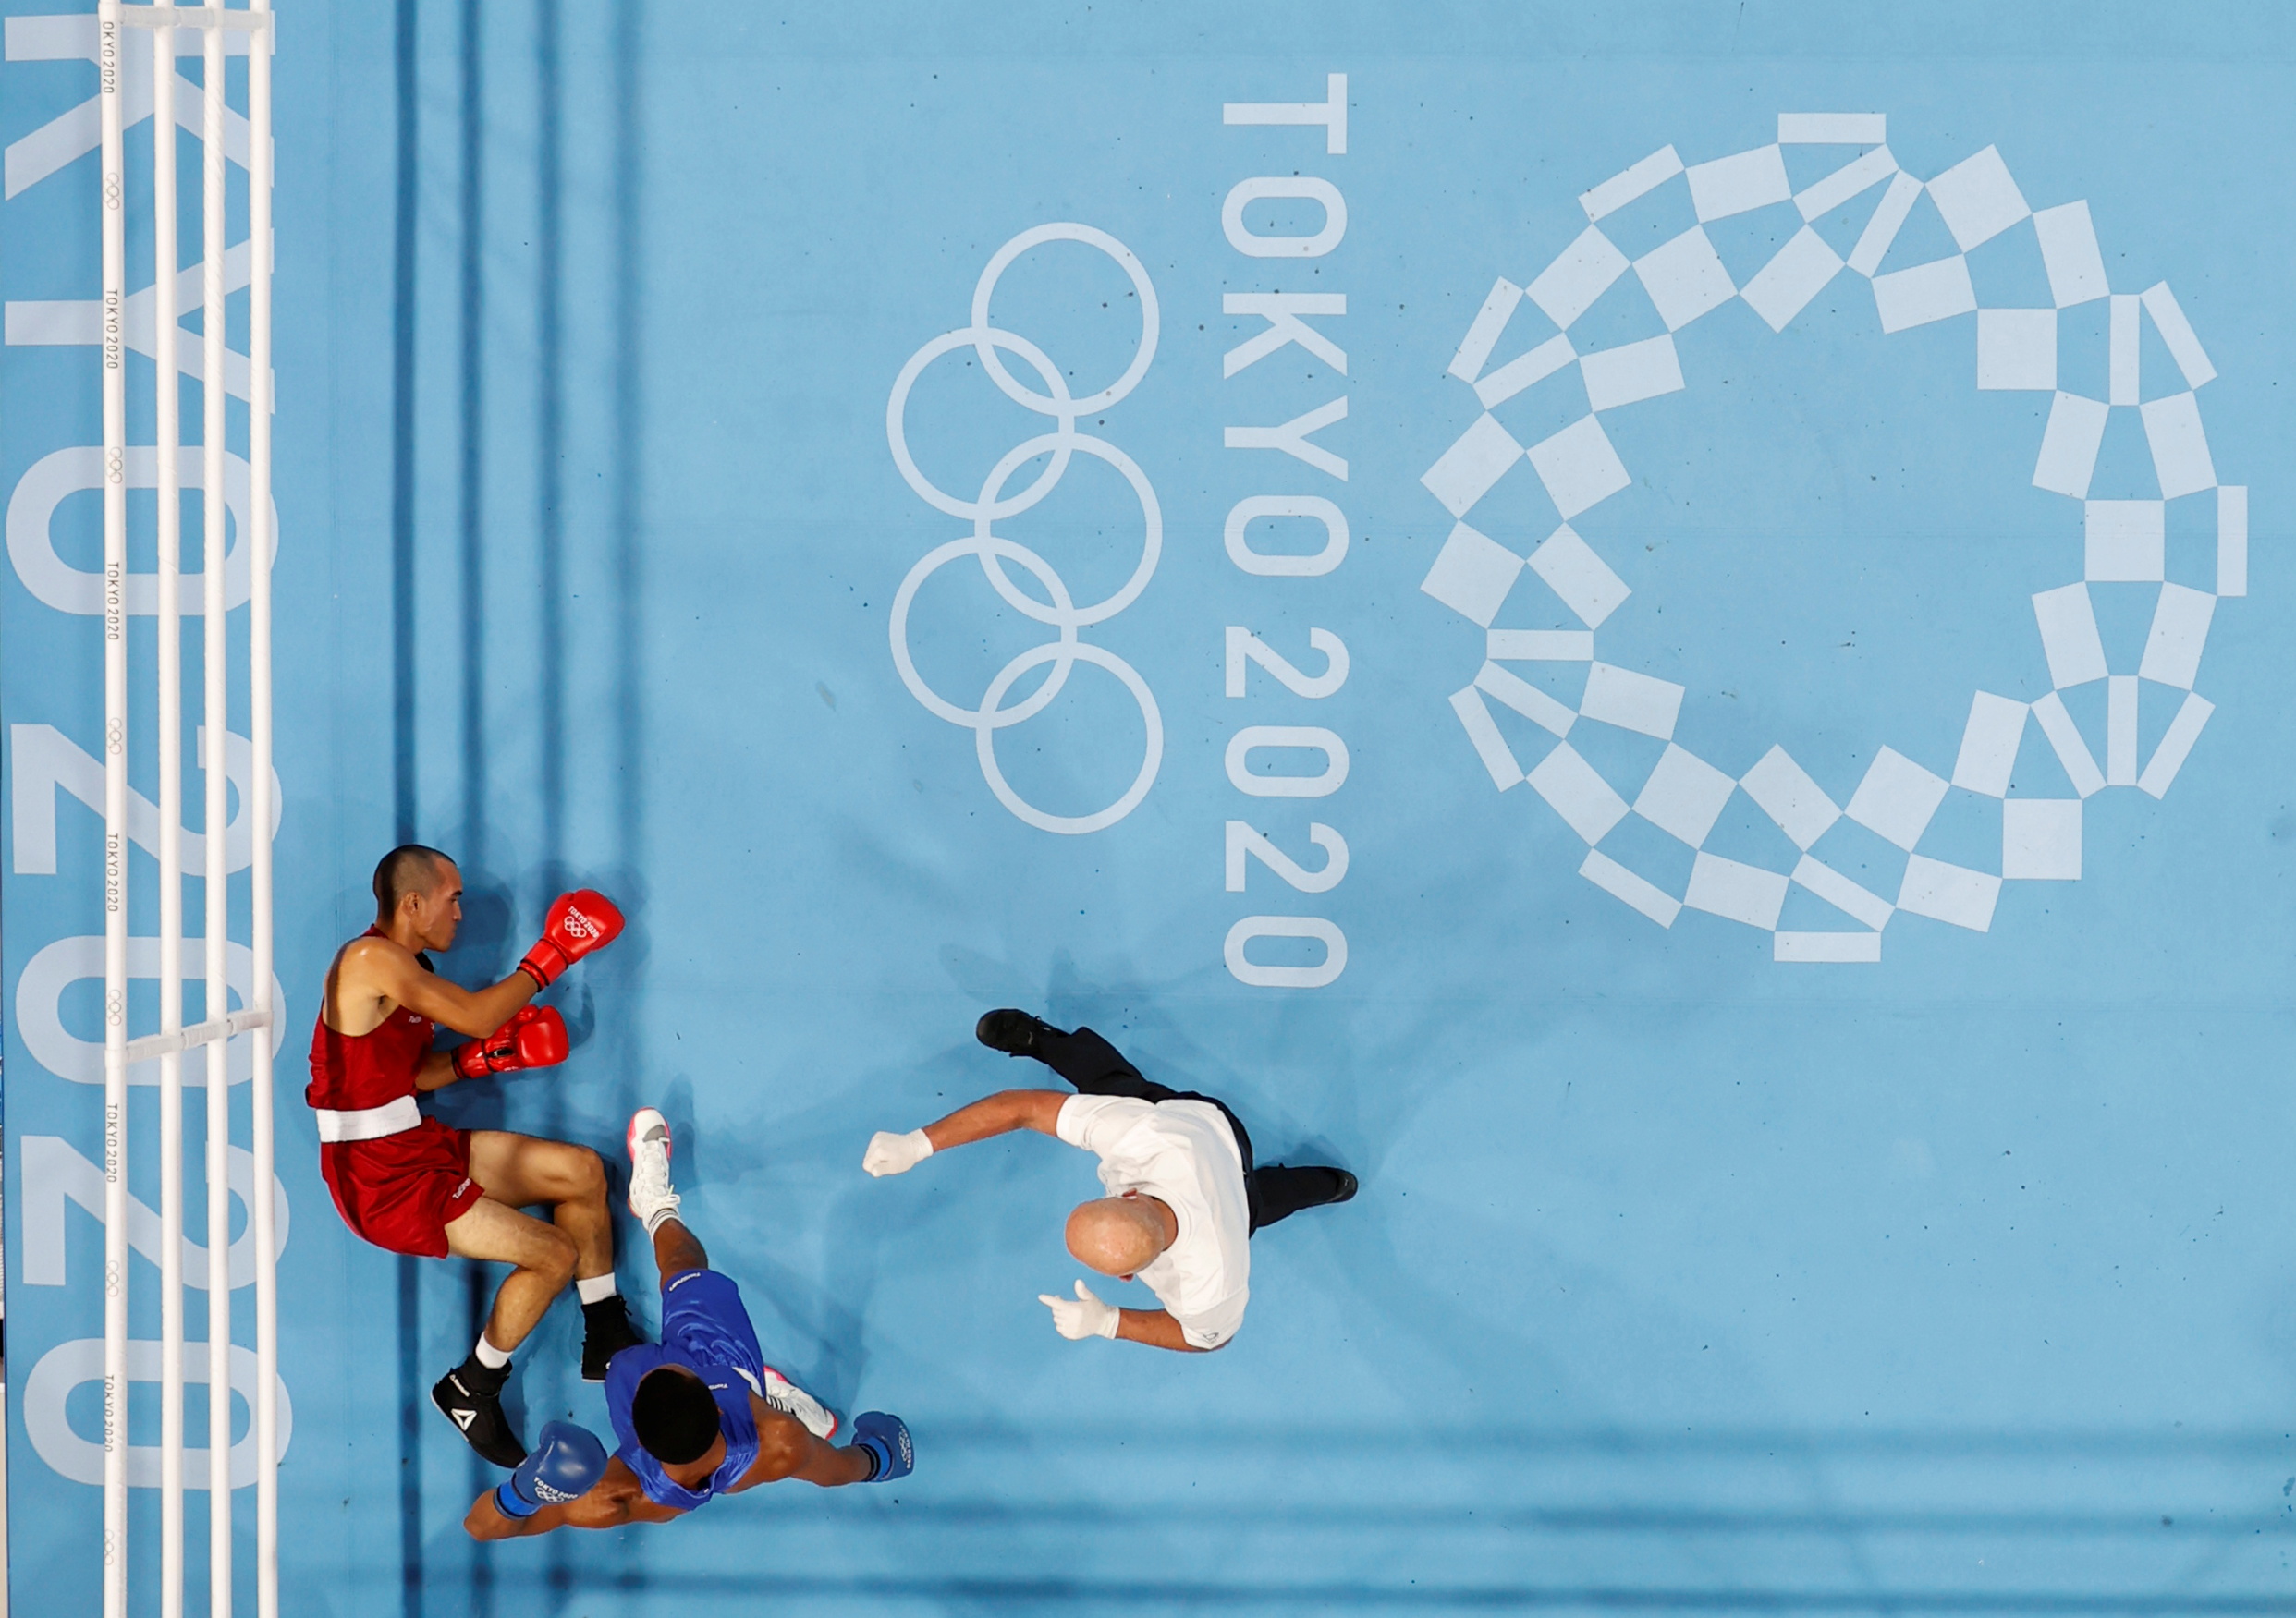 Tokyo 2020 Olympics - Boxing - Men's Middleweight - Last 32 - Kokugikan Arena - Tokyo, Japan - July 26, 2021. Eldric Sella Rodriguez of the Refugee Olympic Team lies on the ground after being knocked down during his fight against Euri Cedeno Martinez of the Dominican Republic